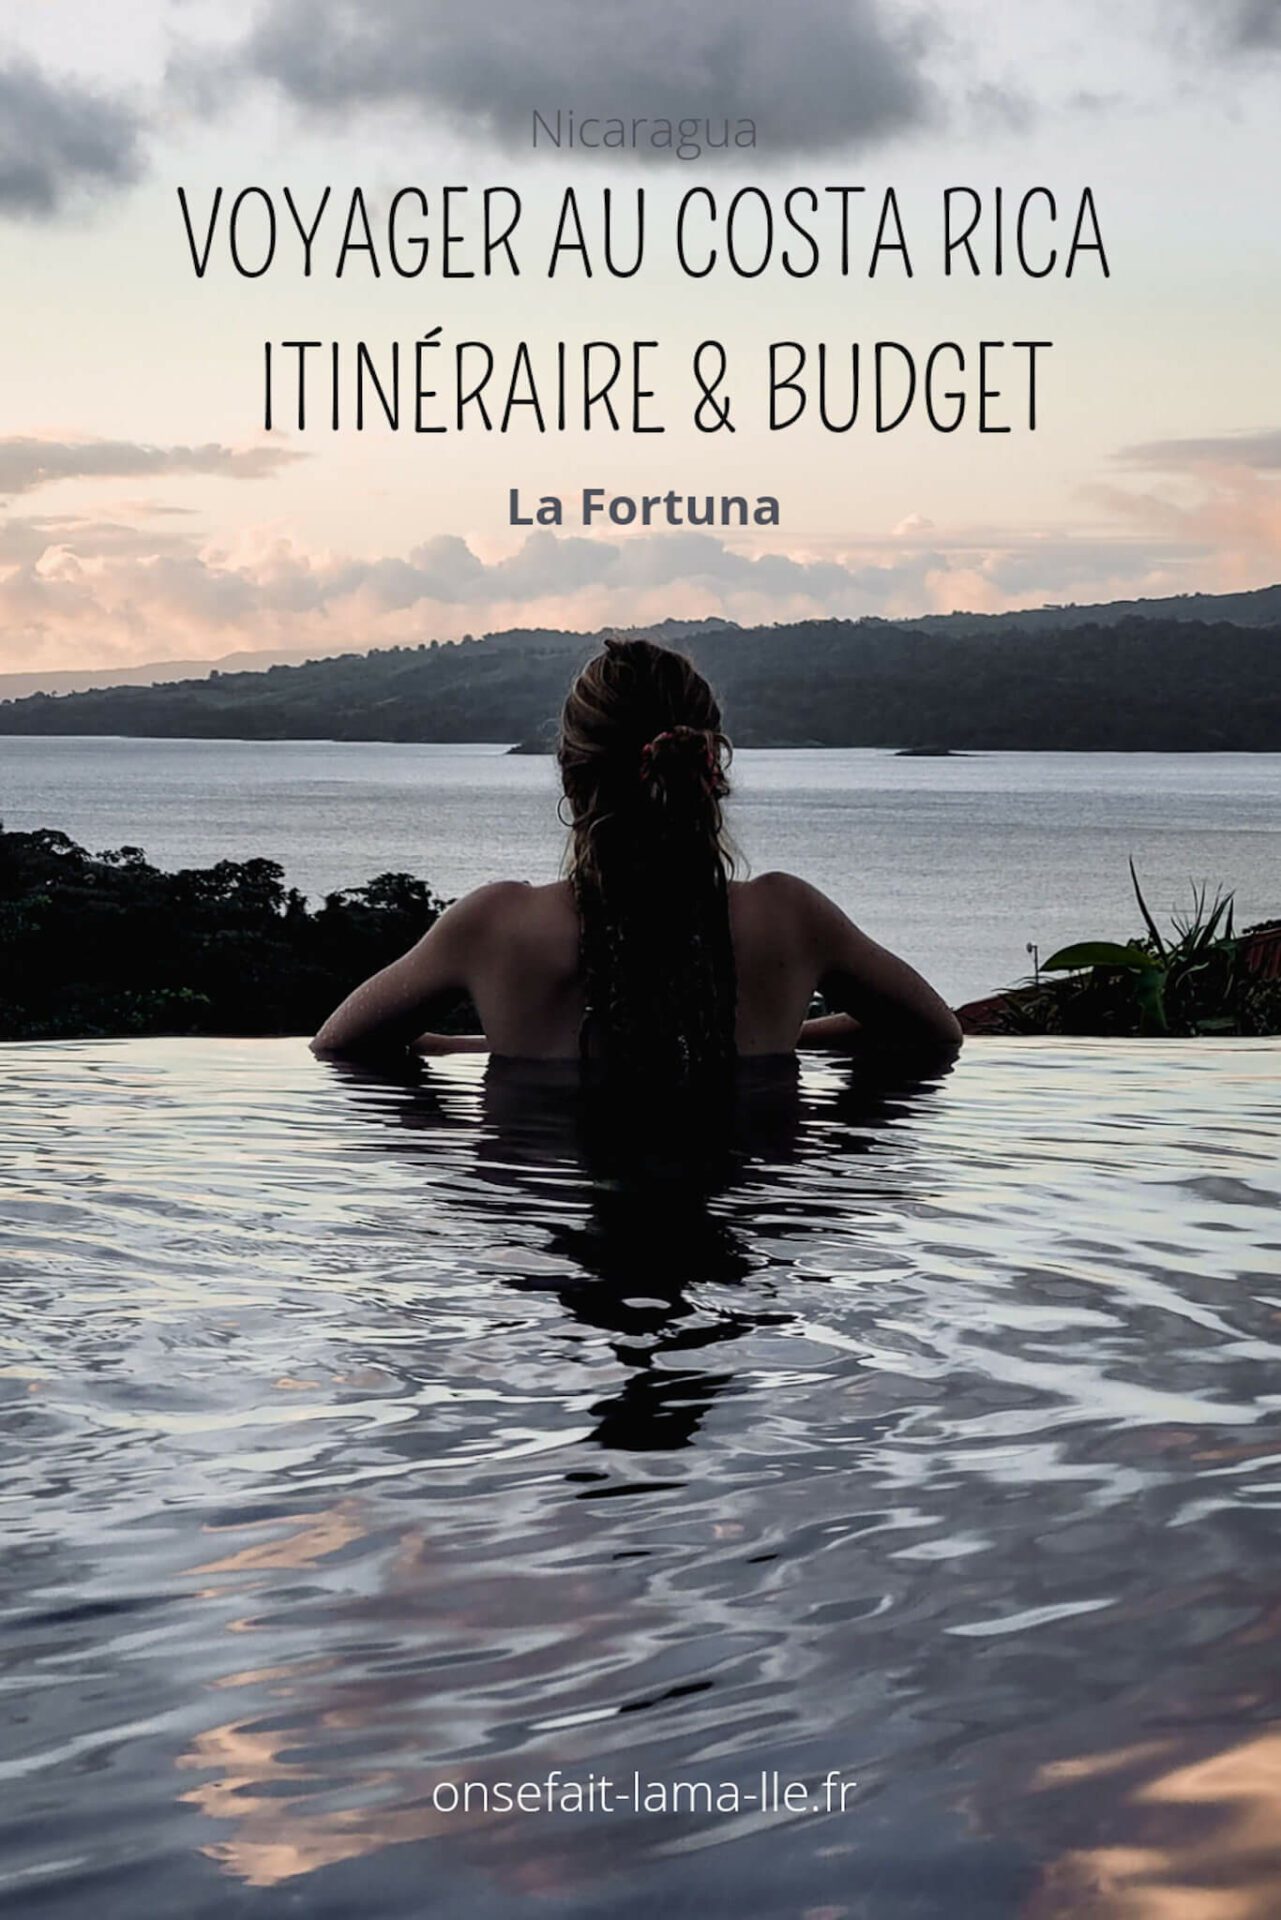 itineraire voyager au costa rica